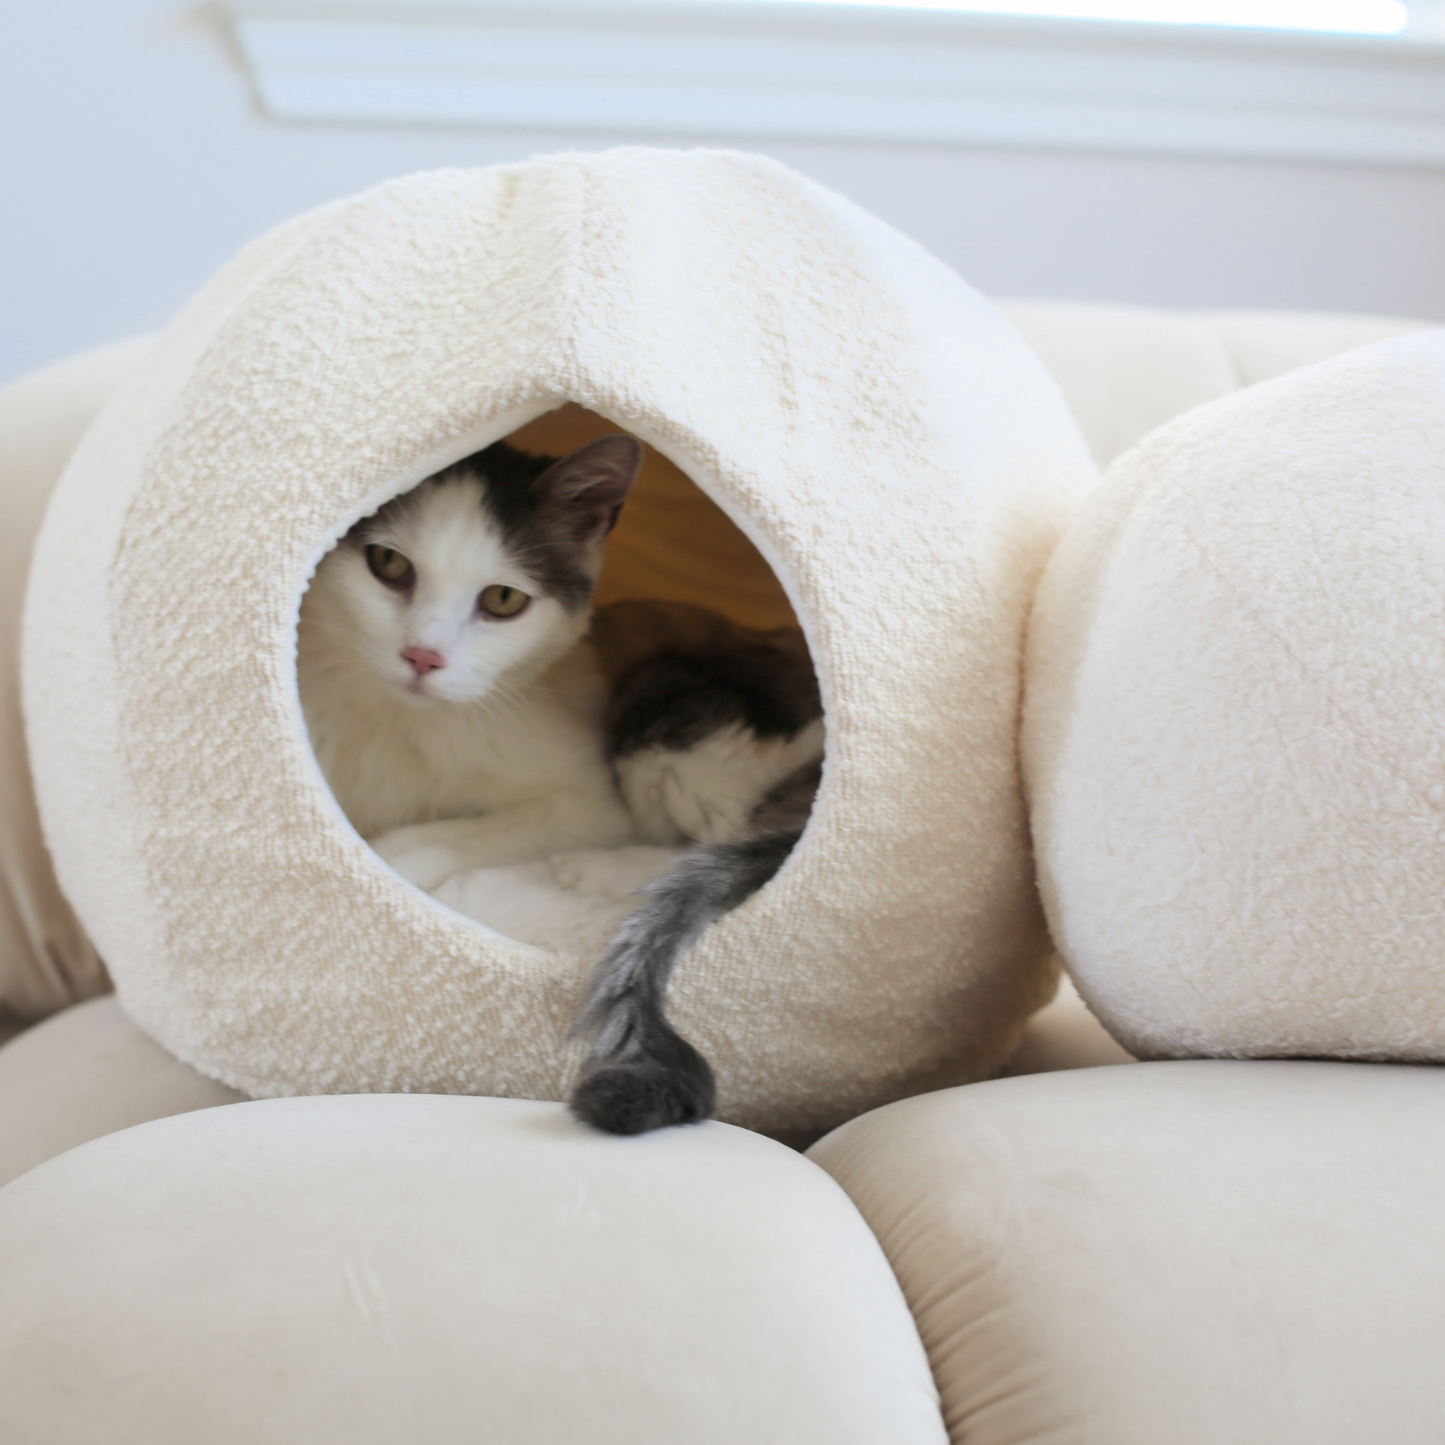 moon cat cave by catenary home with grey and white cat inside, this enclosed cat bed is made of boucle and foam by modern cat furniture company catenary